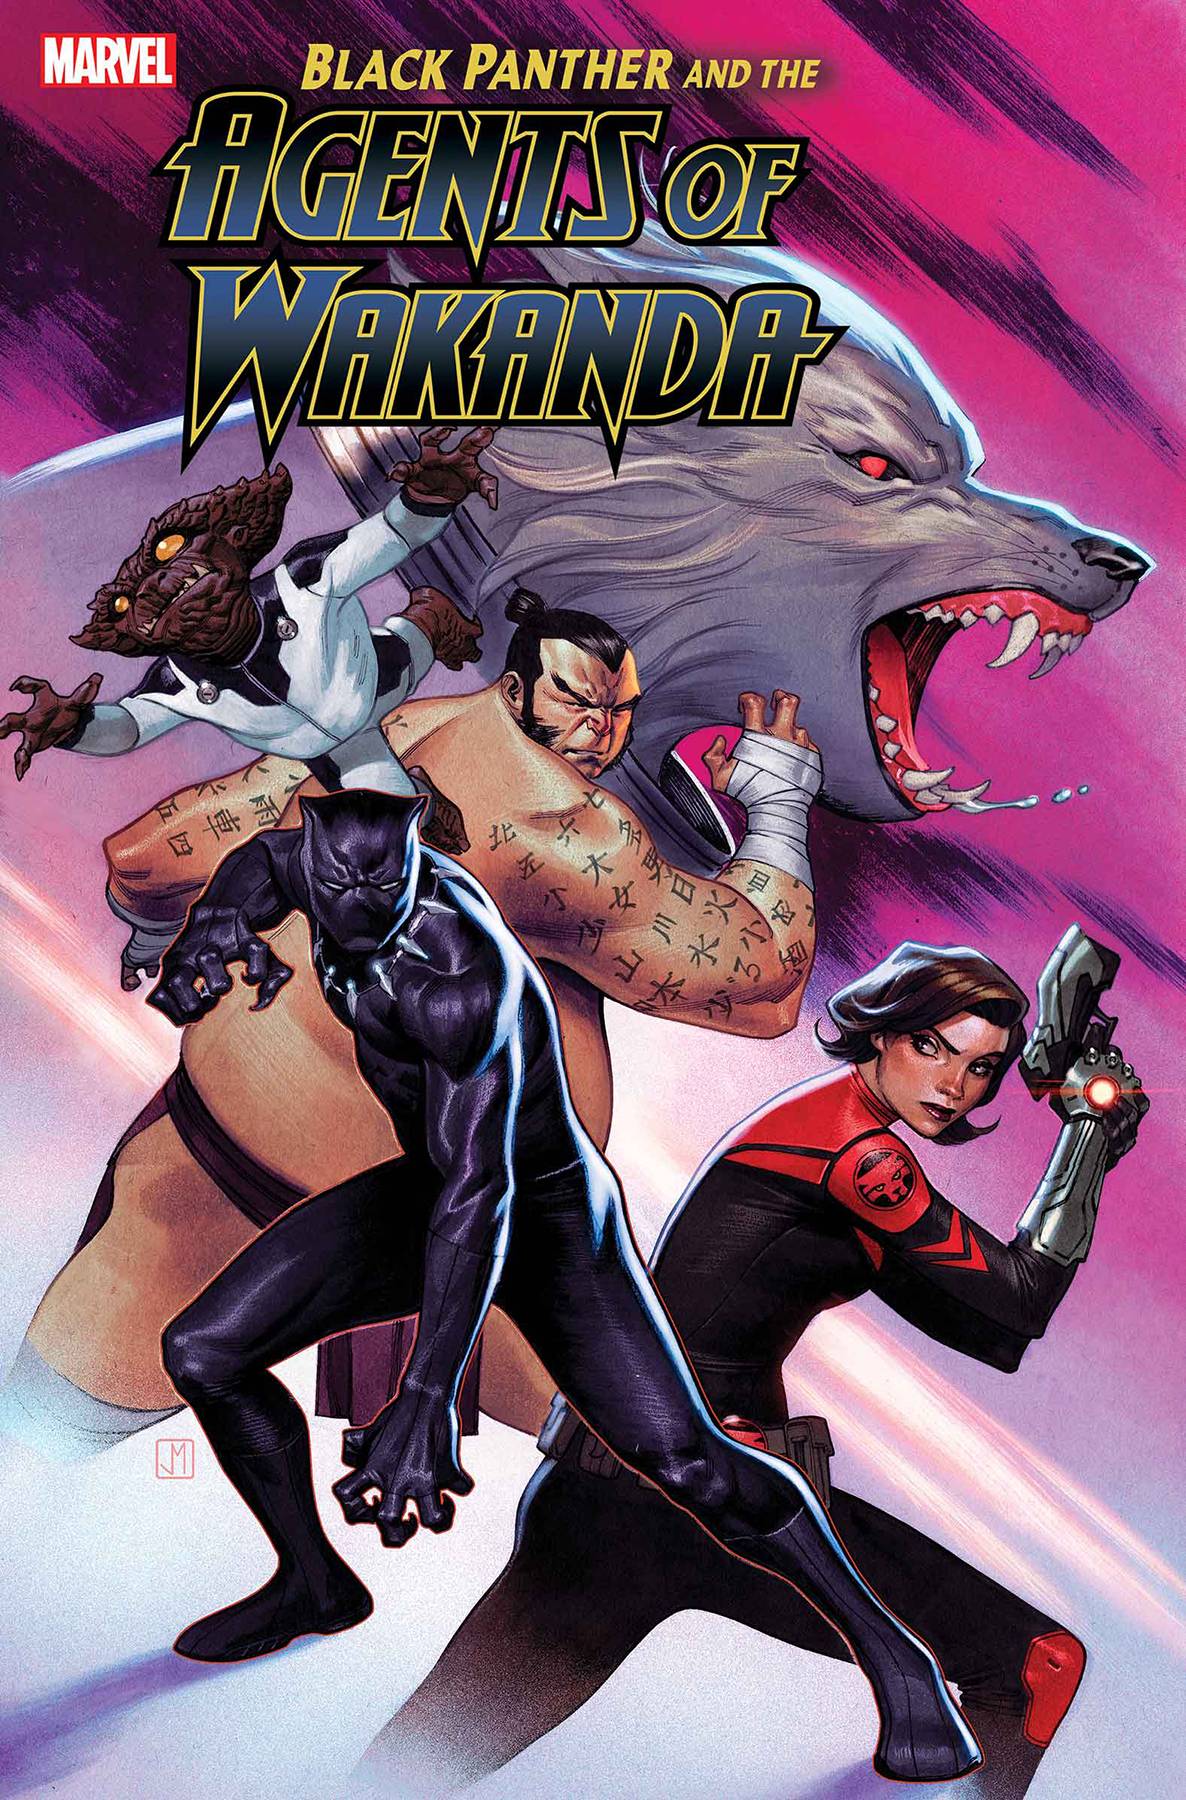 Black Panther and the Agents of Wakanda #2 - State of Comics